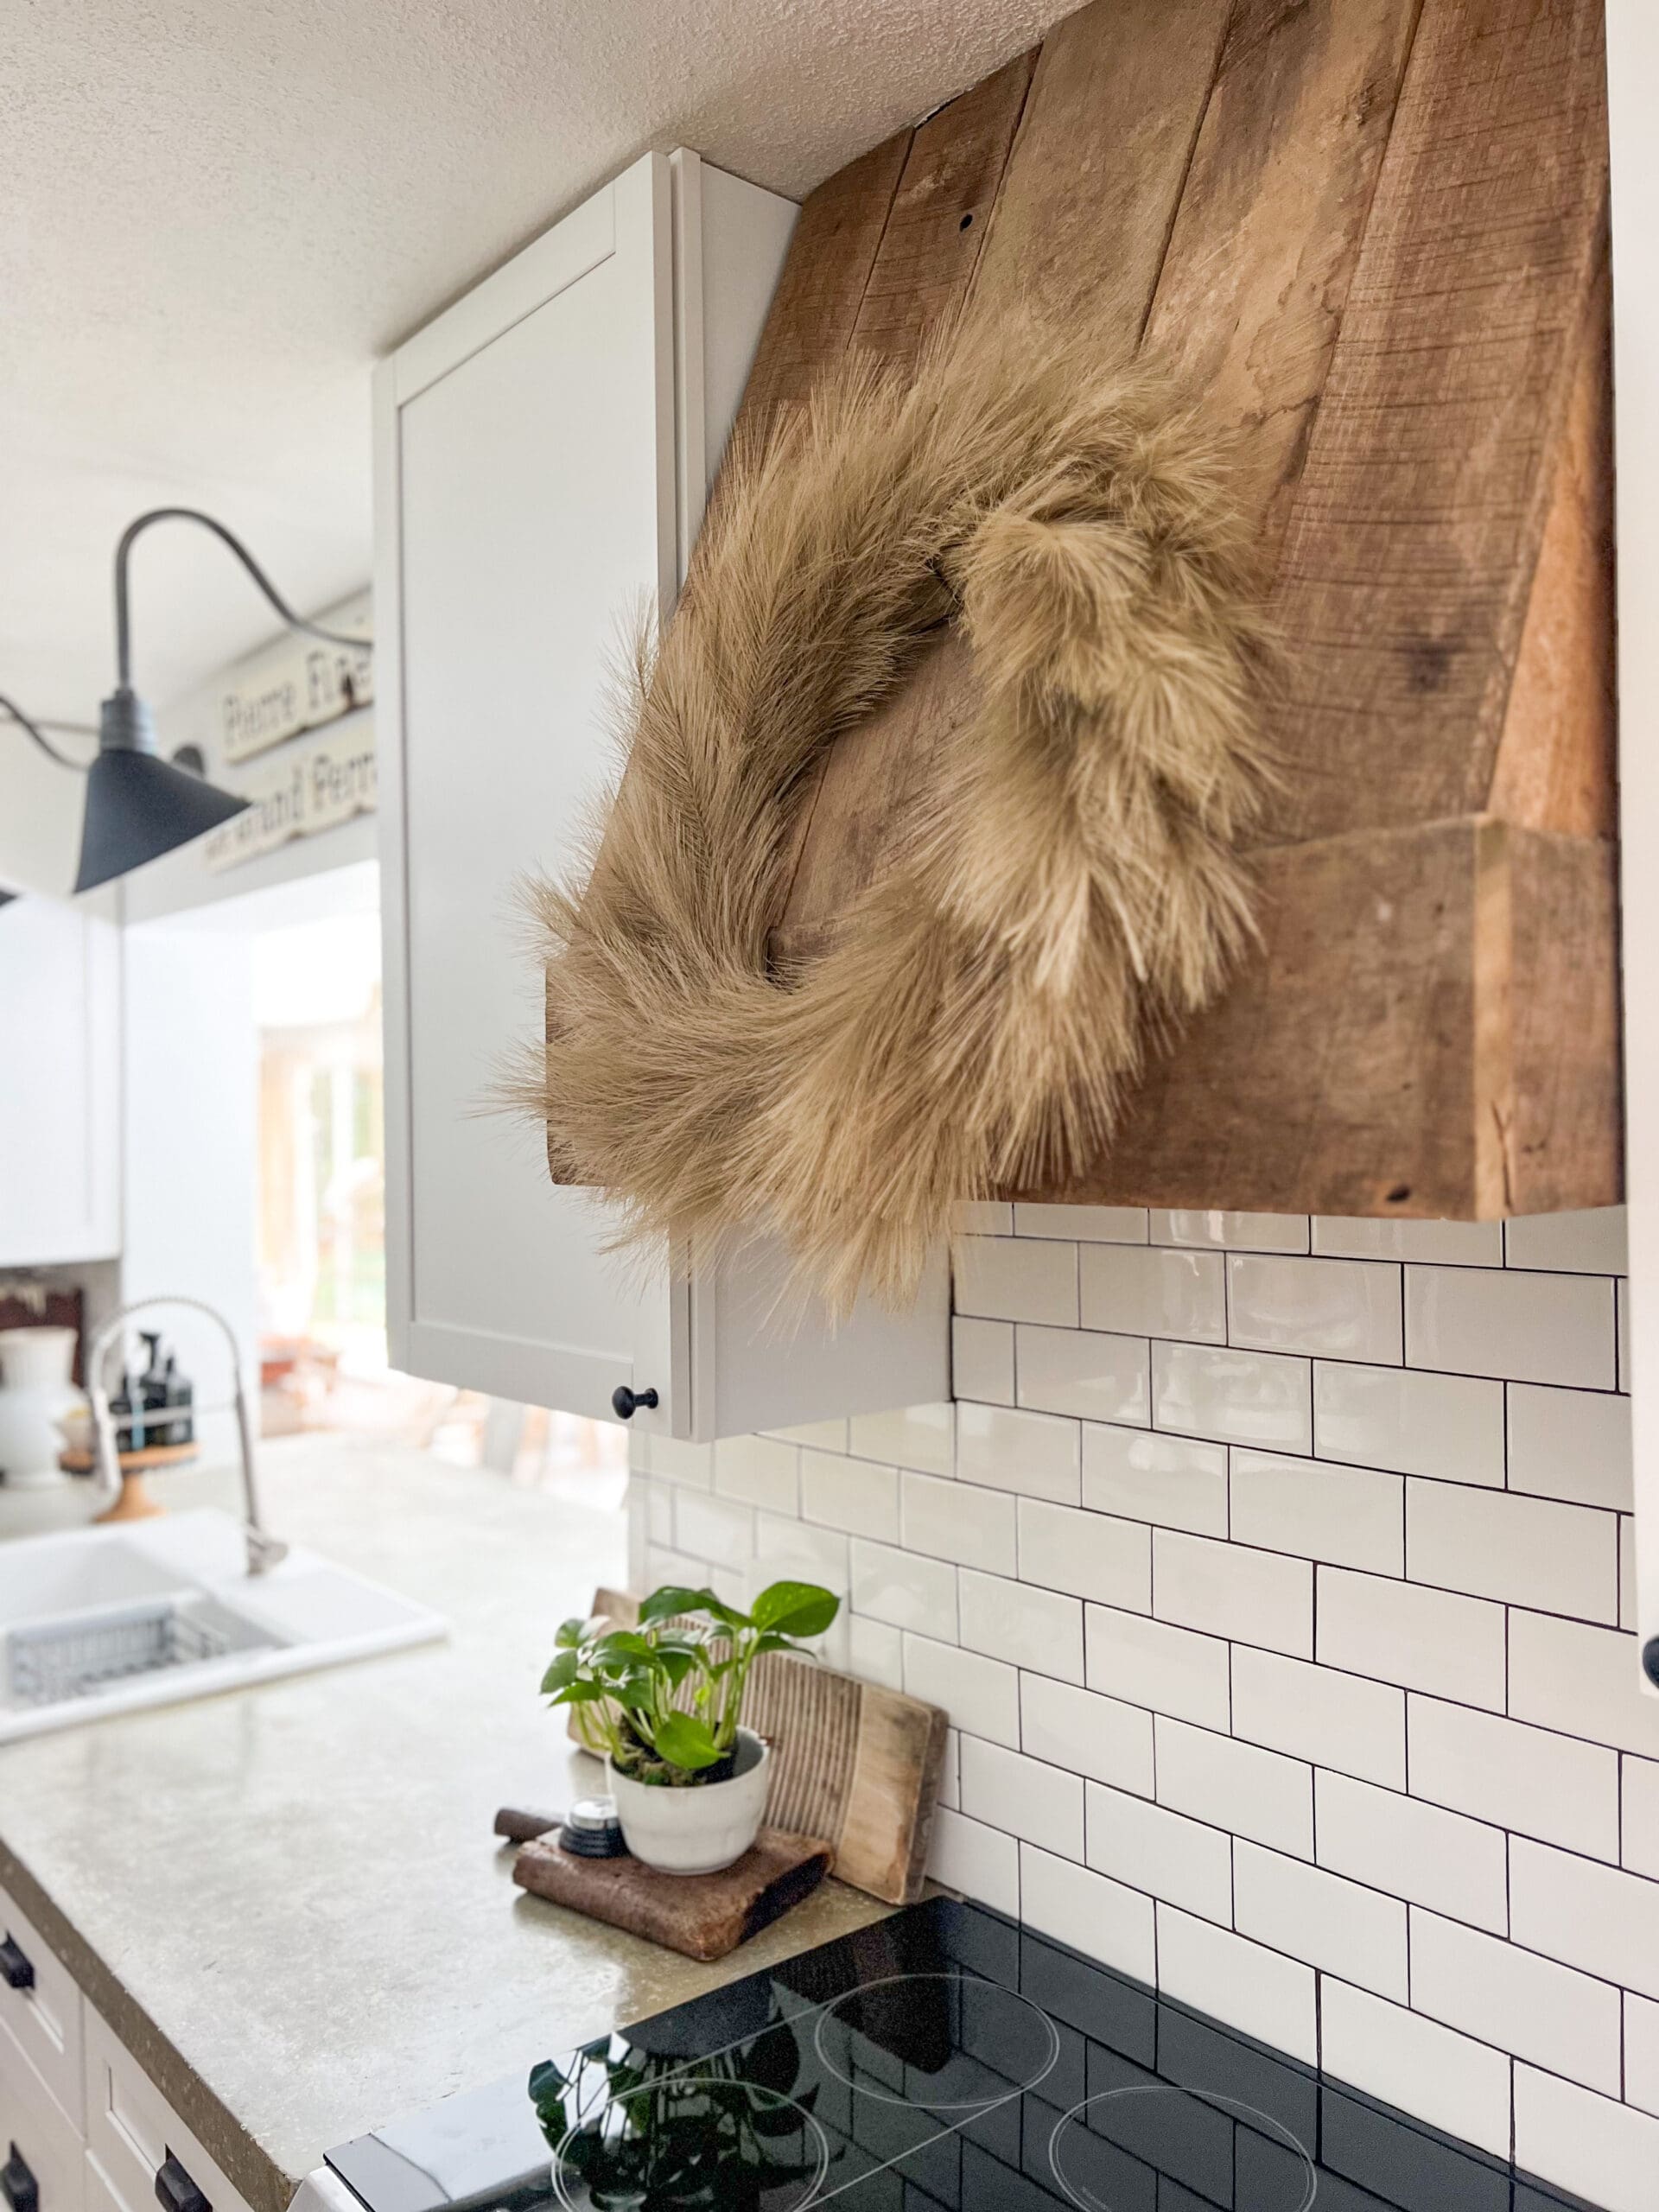 pampas grass wreath hanging on a wooden hood above stove